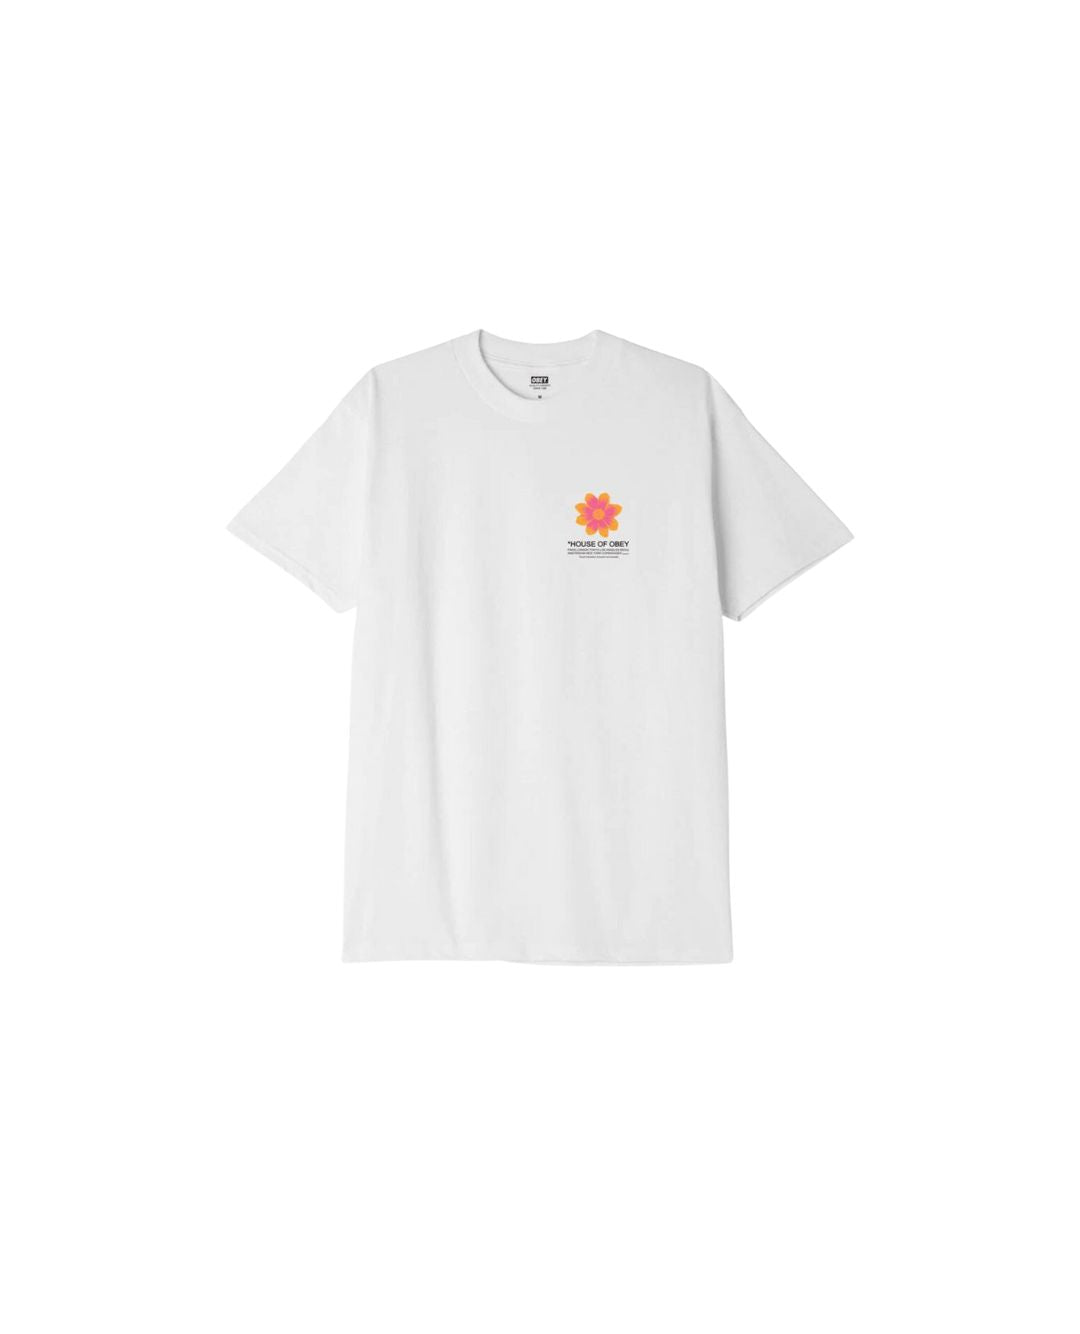 House Of Obey Flower Classic Tee